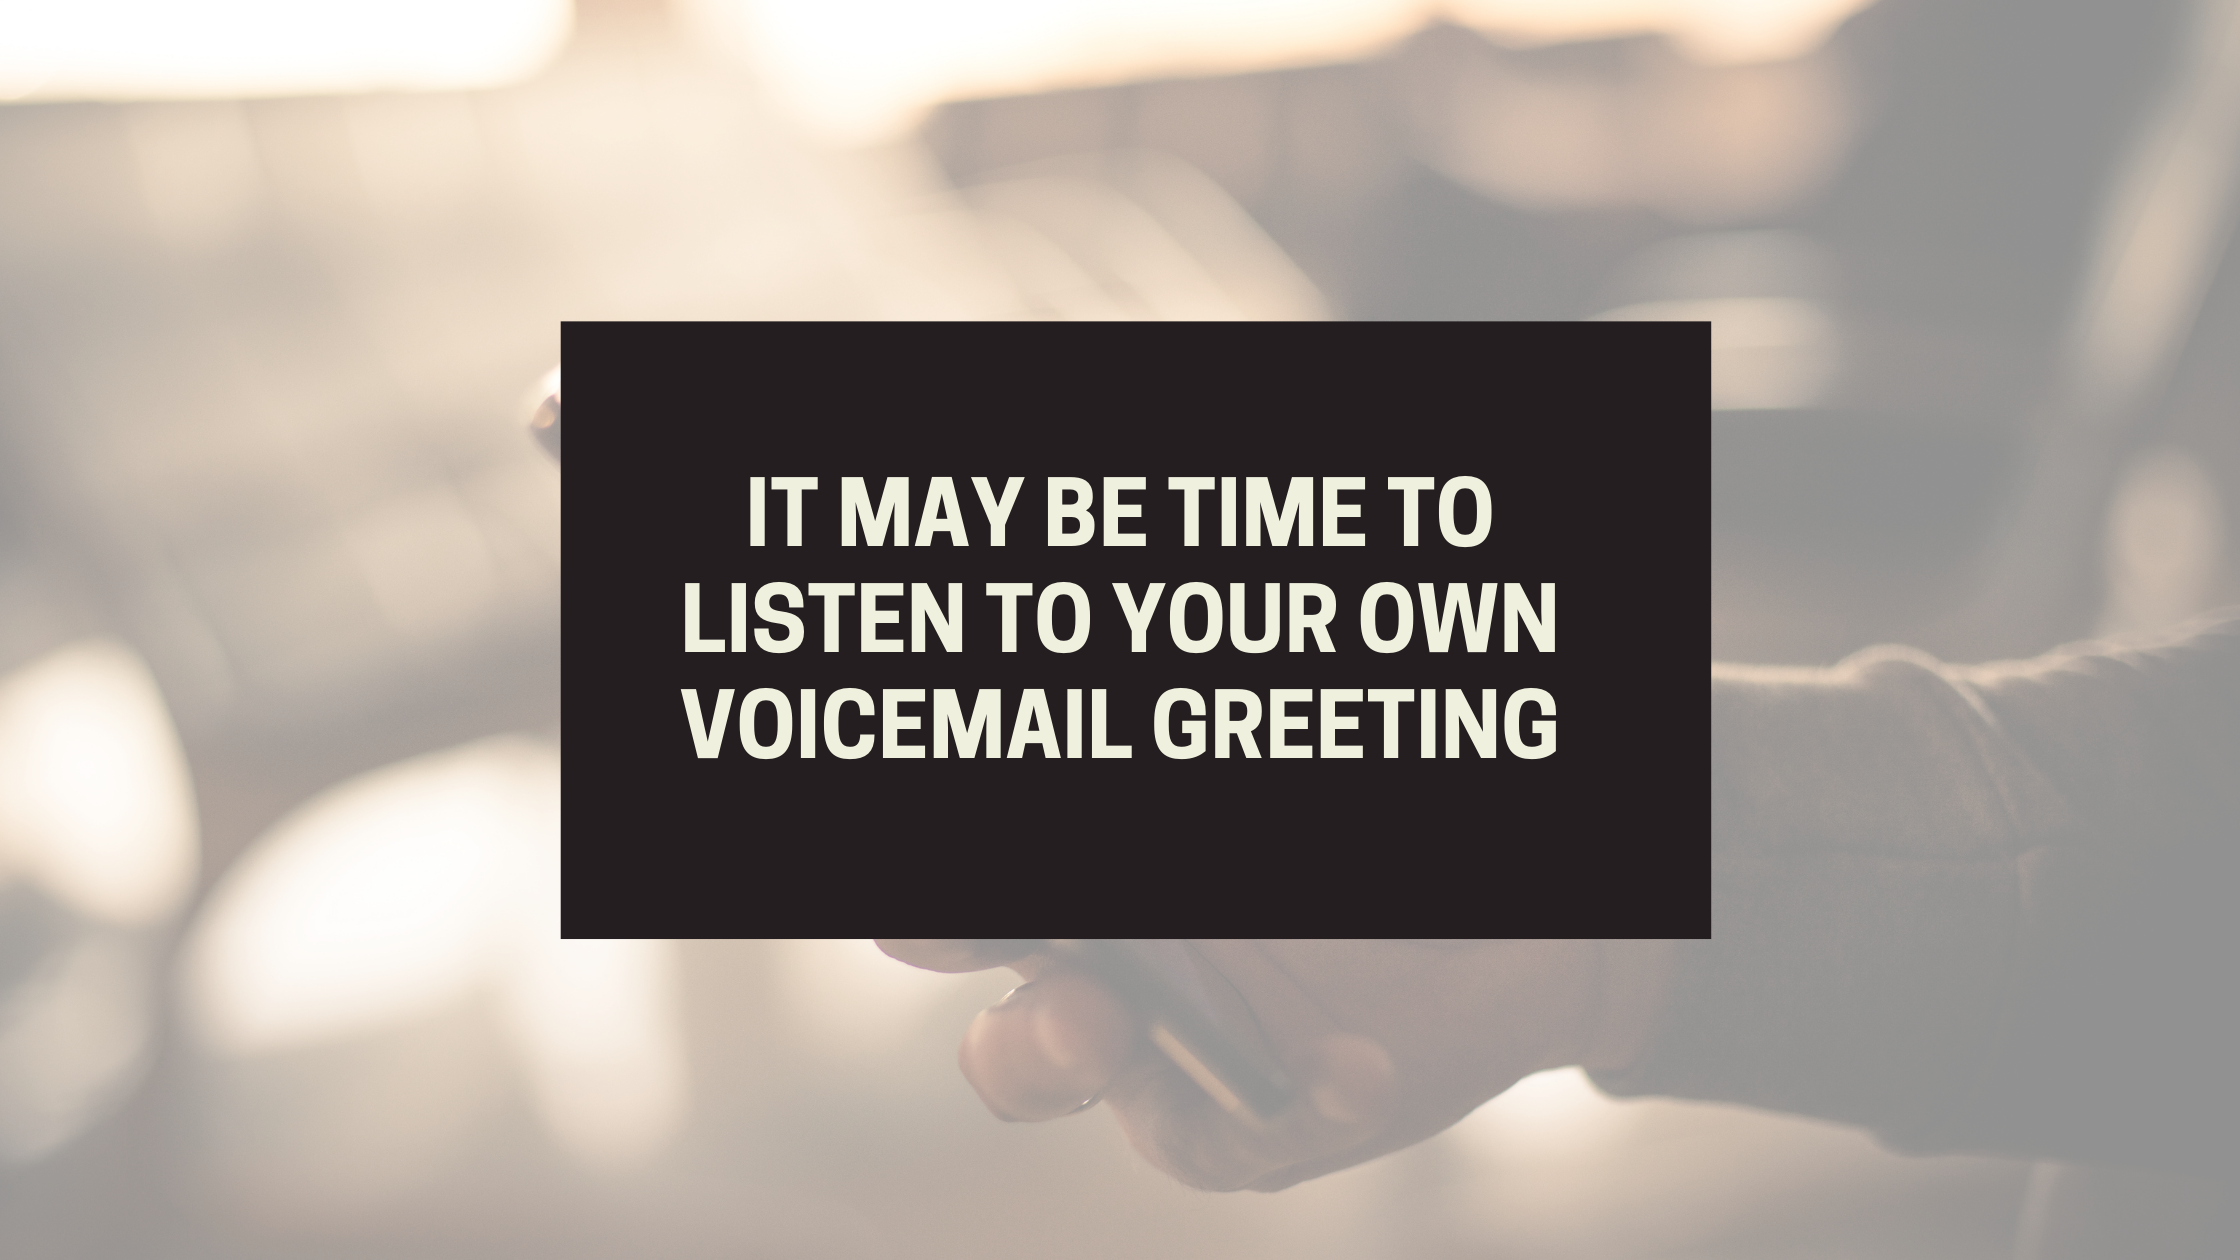 It may be time to listen to your own voicemail greeting